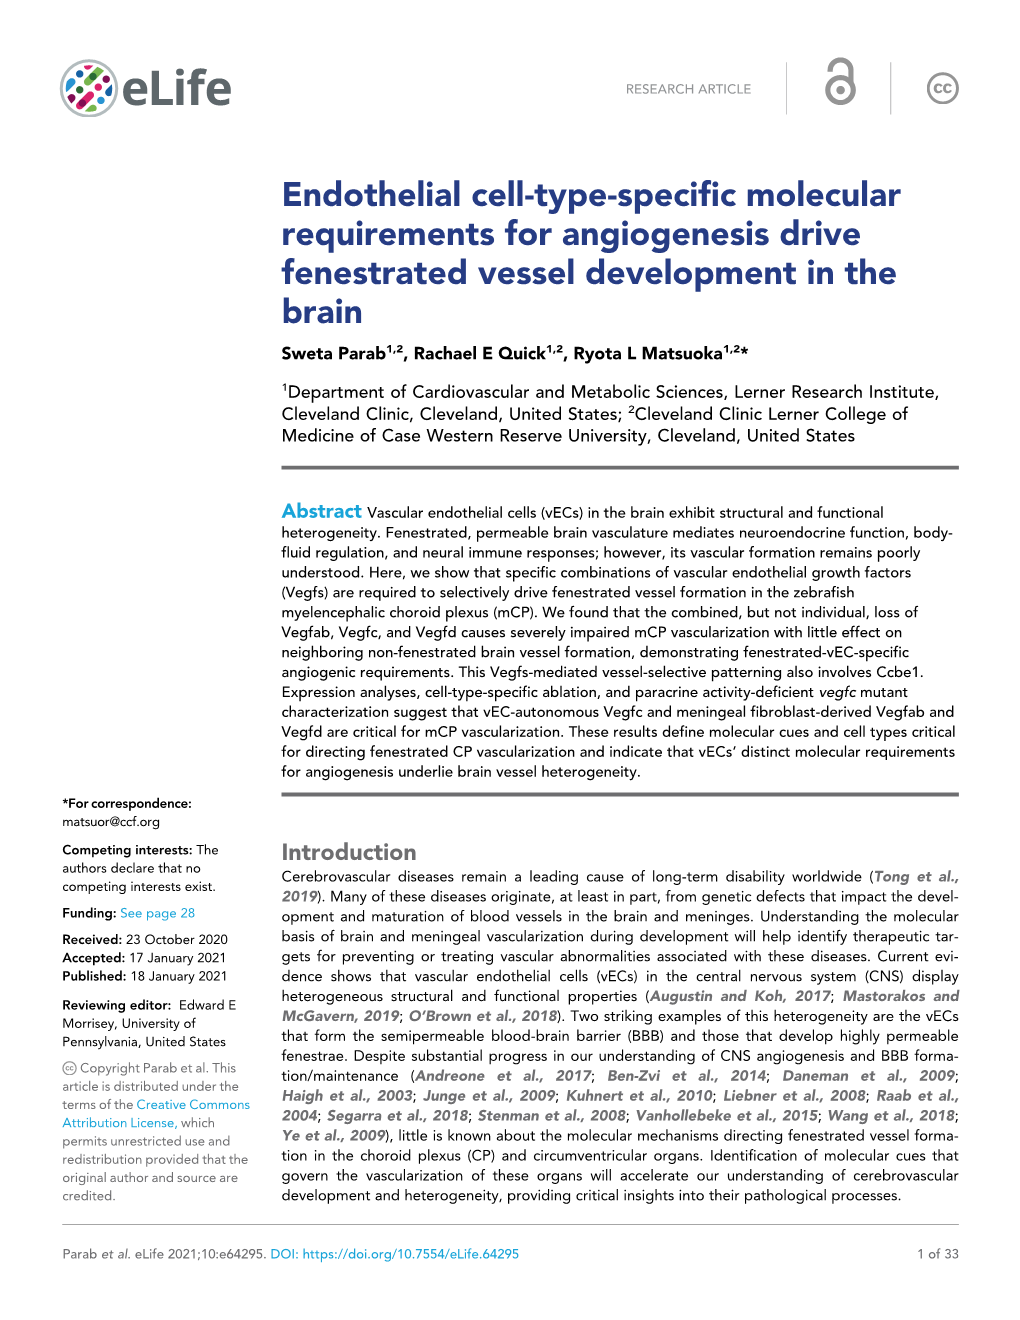 Endothelial Cell-Type-Specific Molecular Requirements For